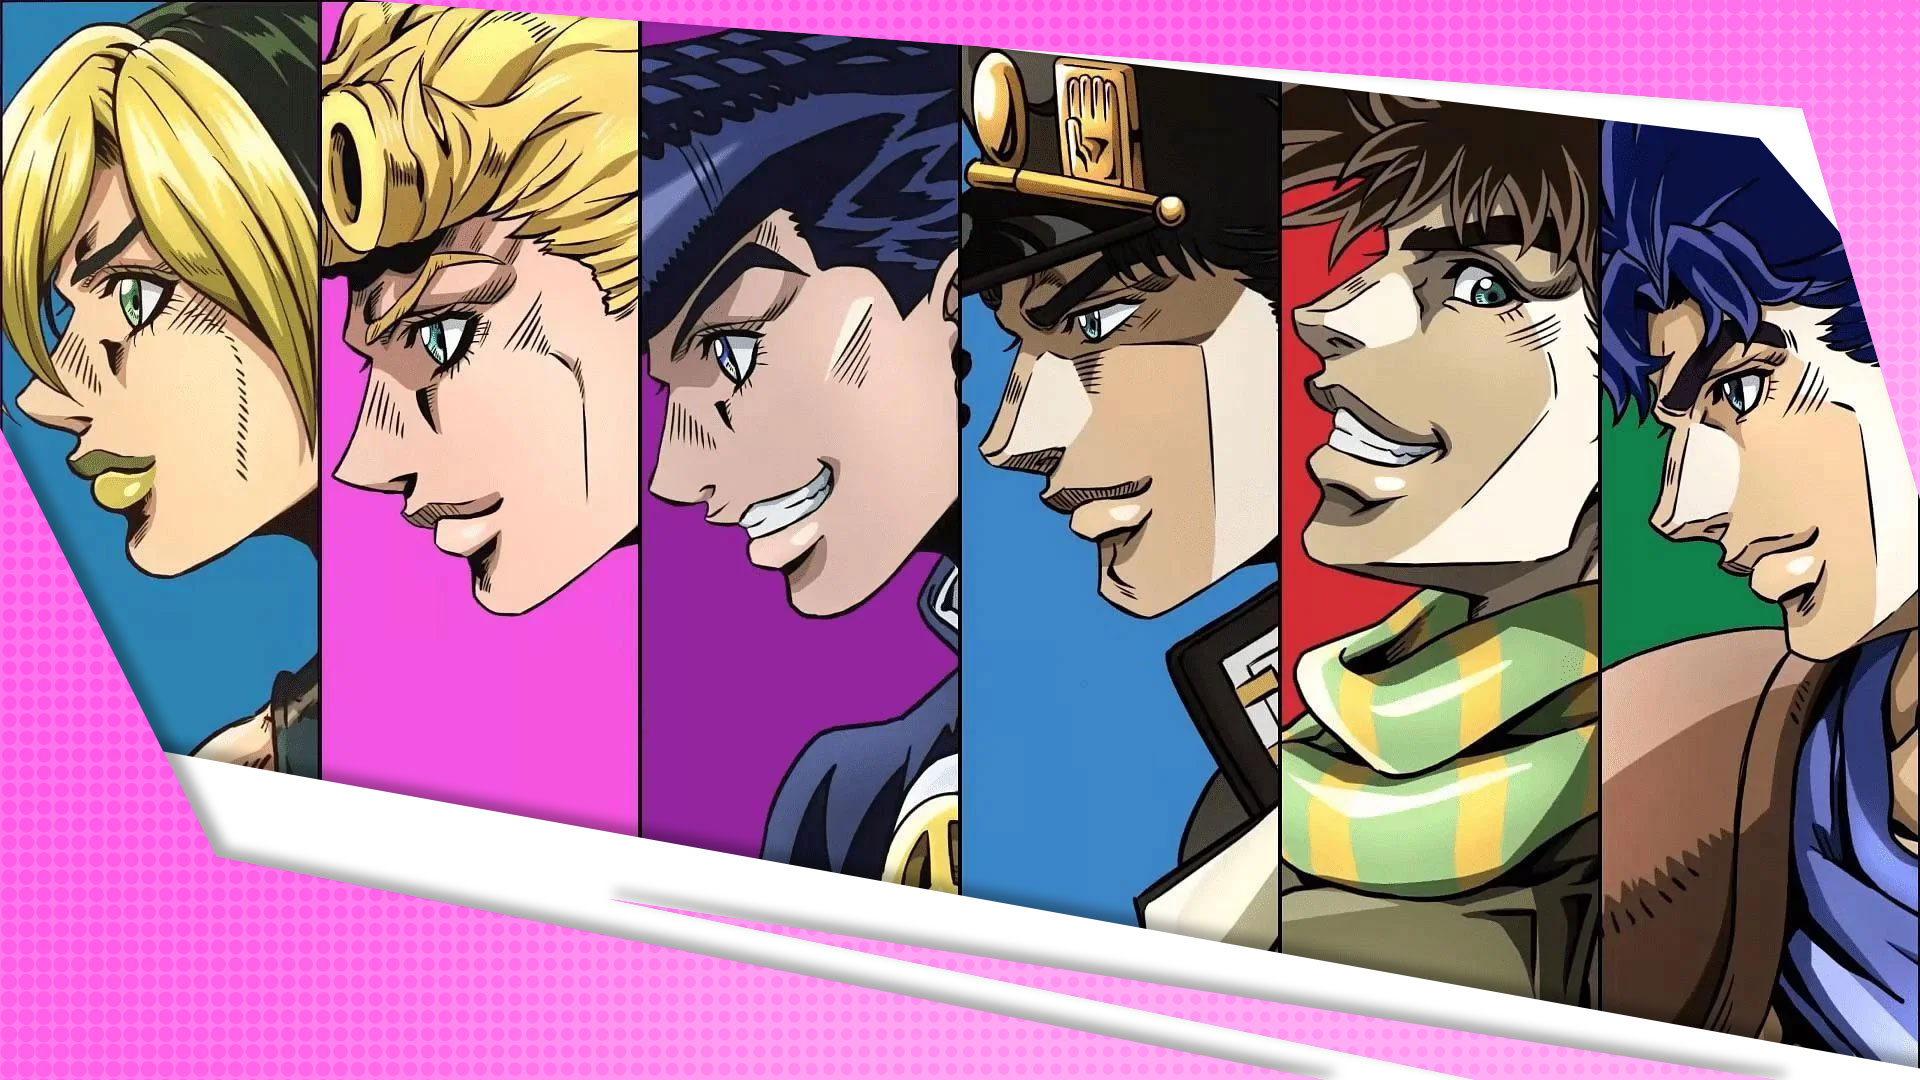 Shunichi Ishimoto Leaves David Production: Why This Might Be a Big Deal for JoJo Anime